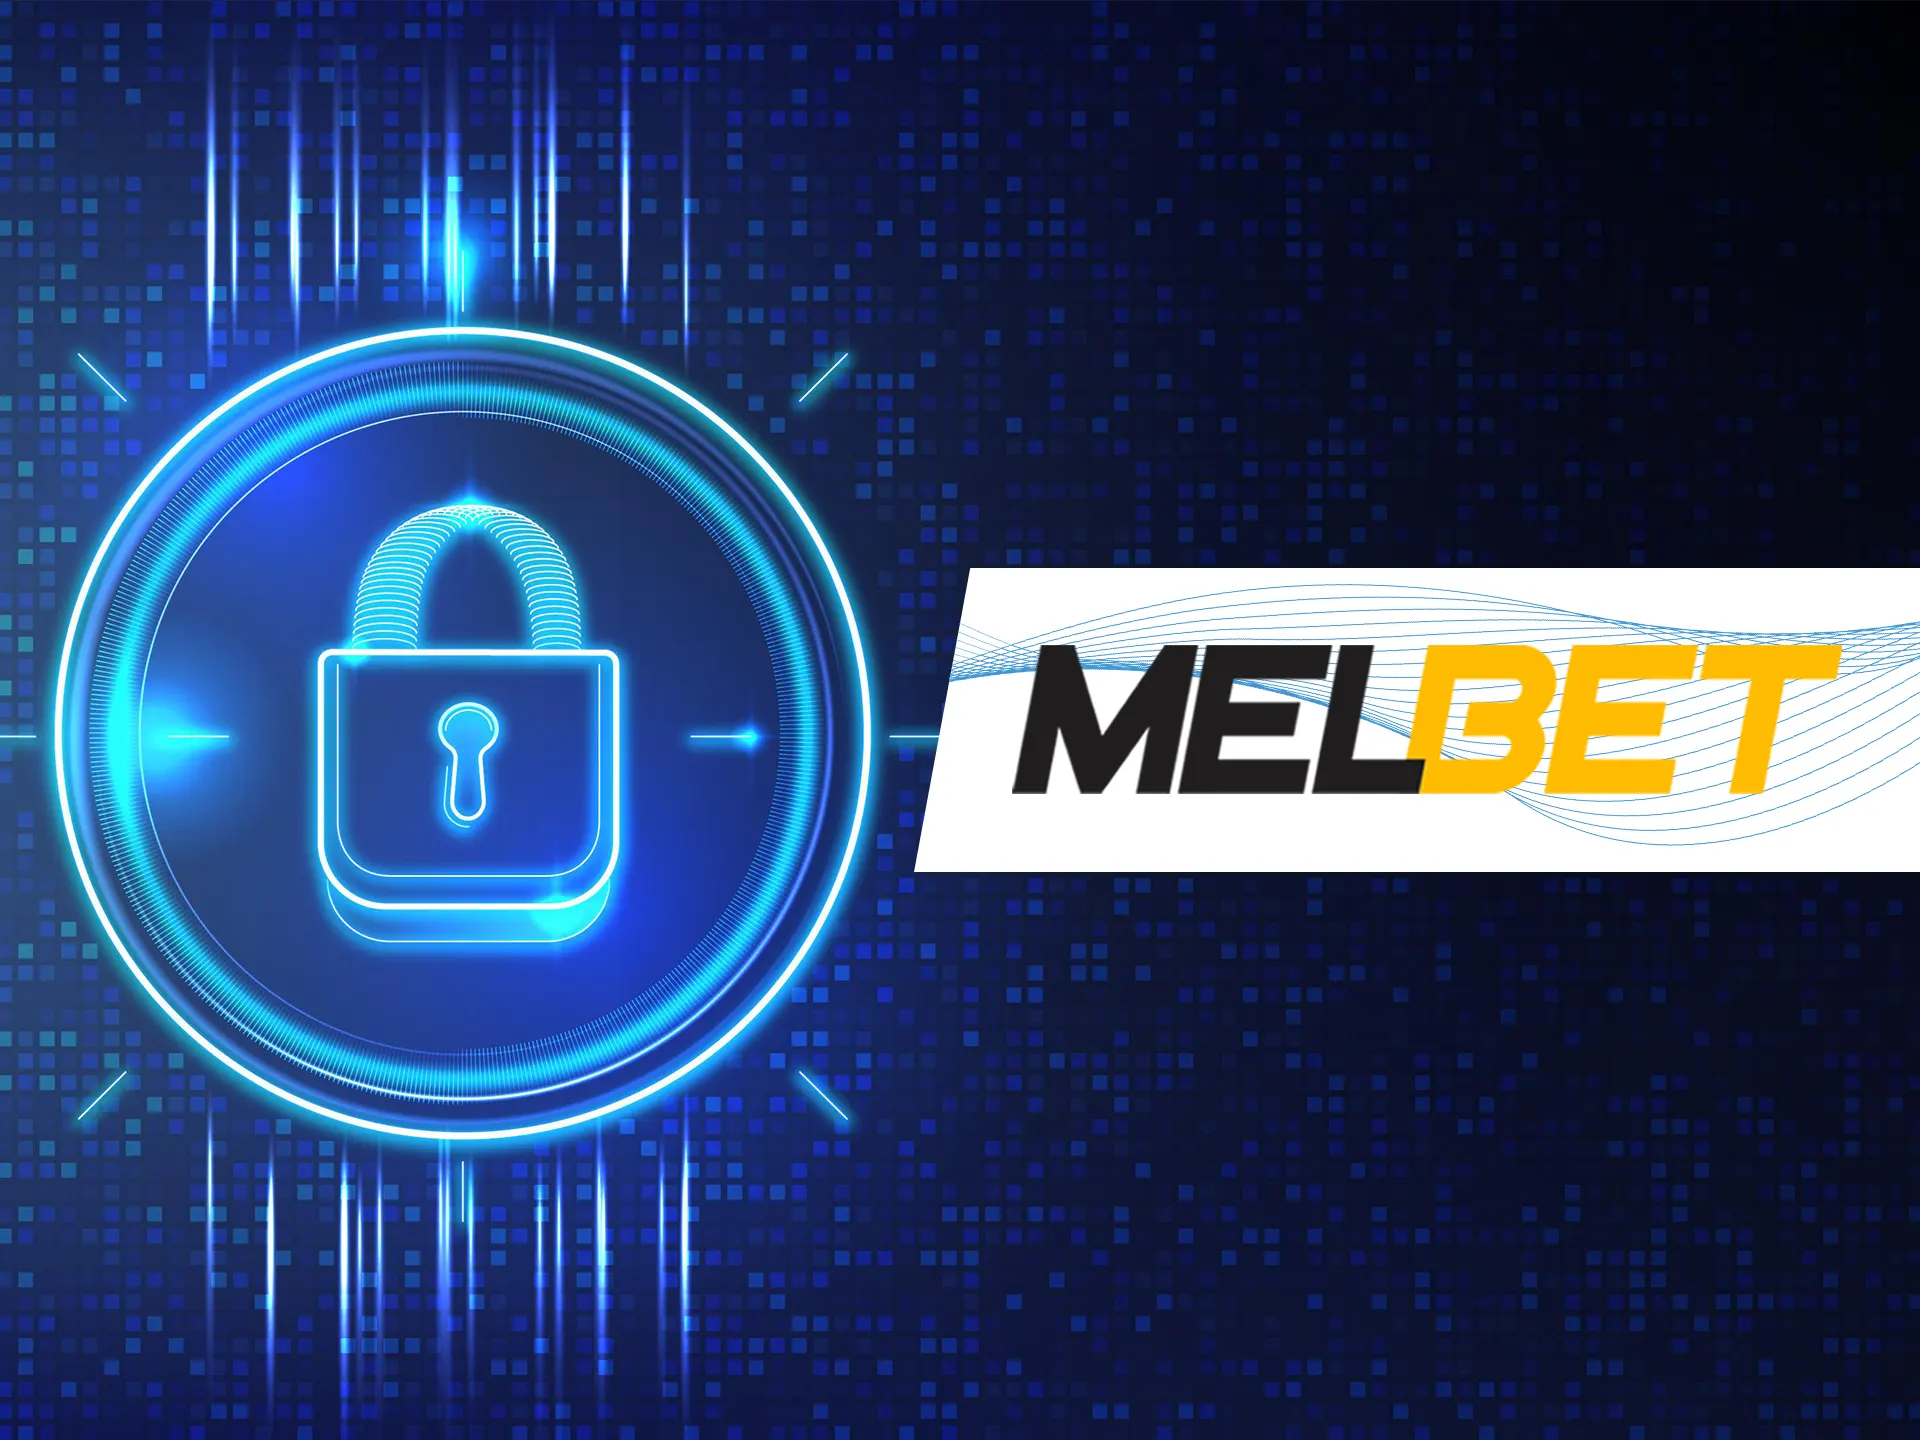 Melbet protects all of the customers.